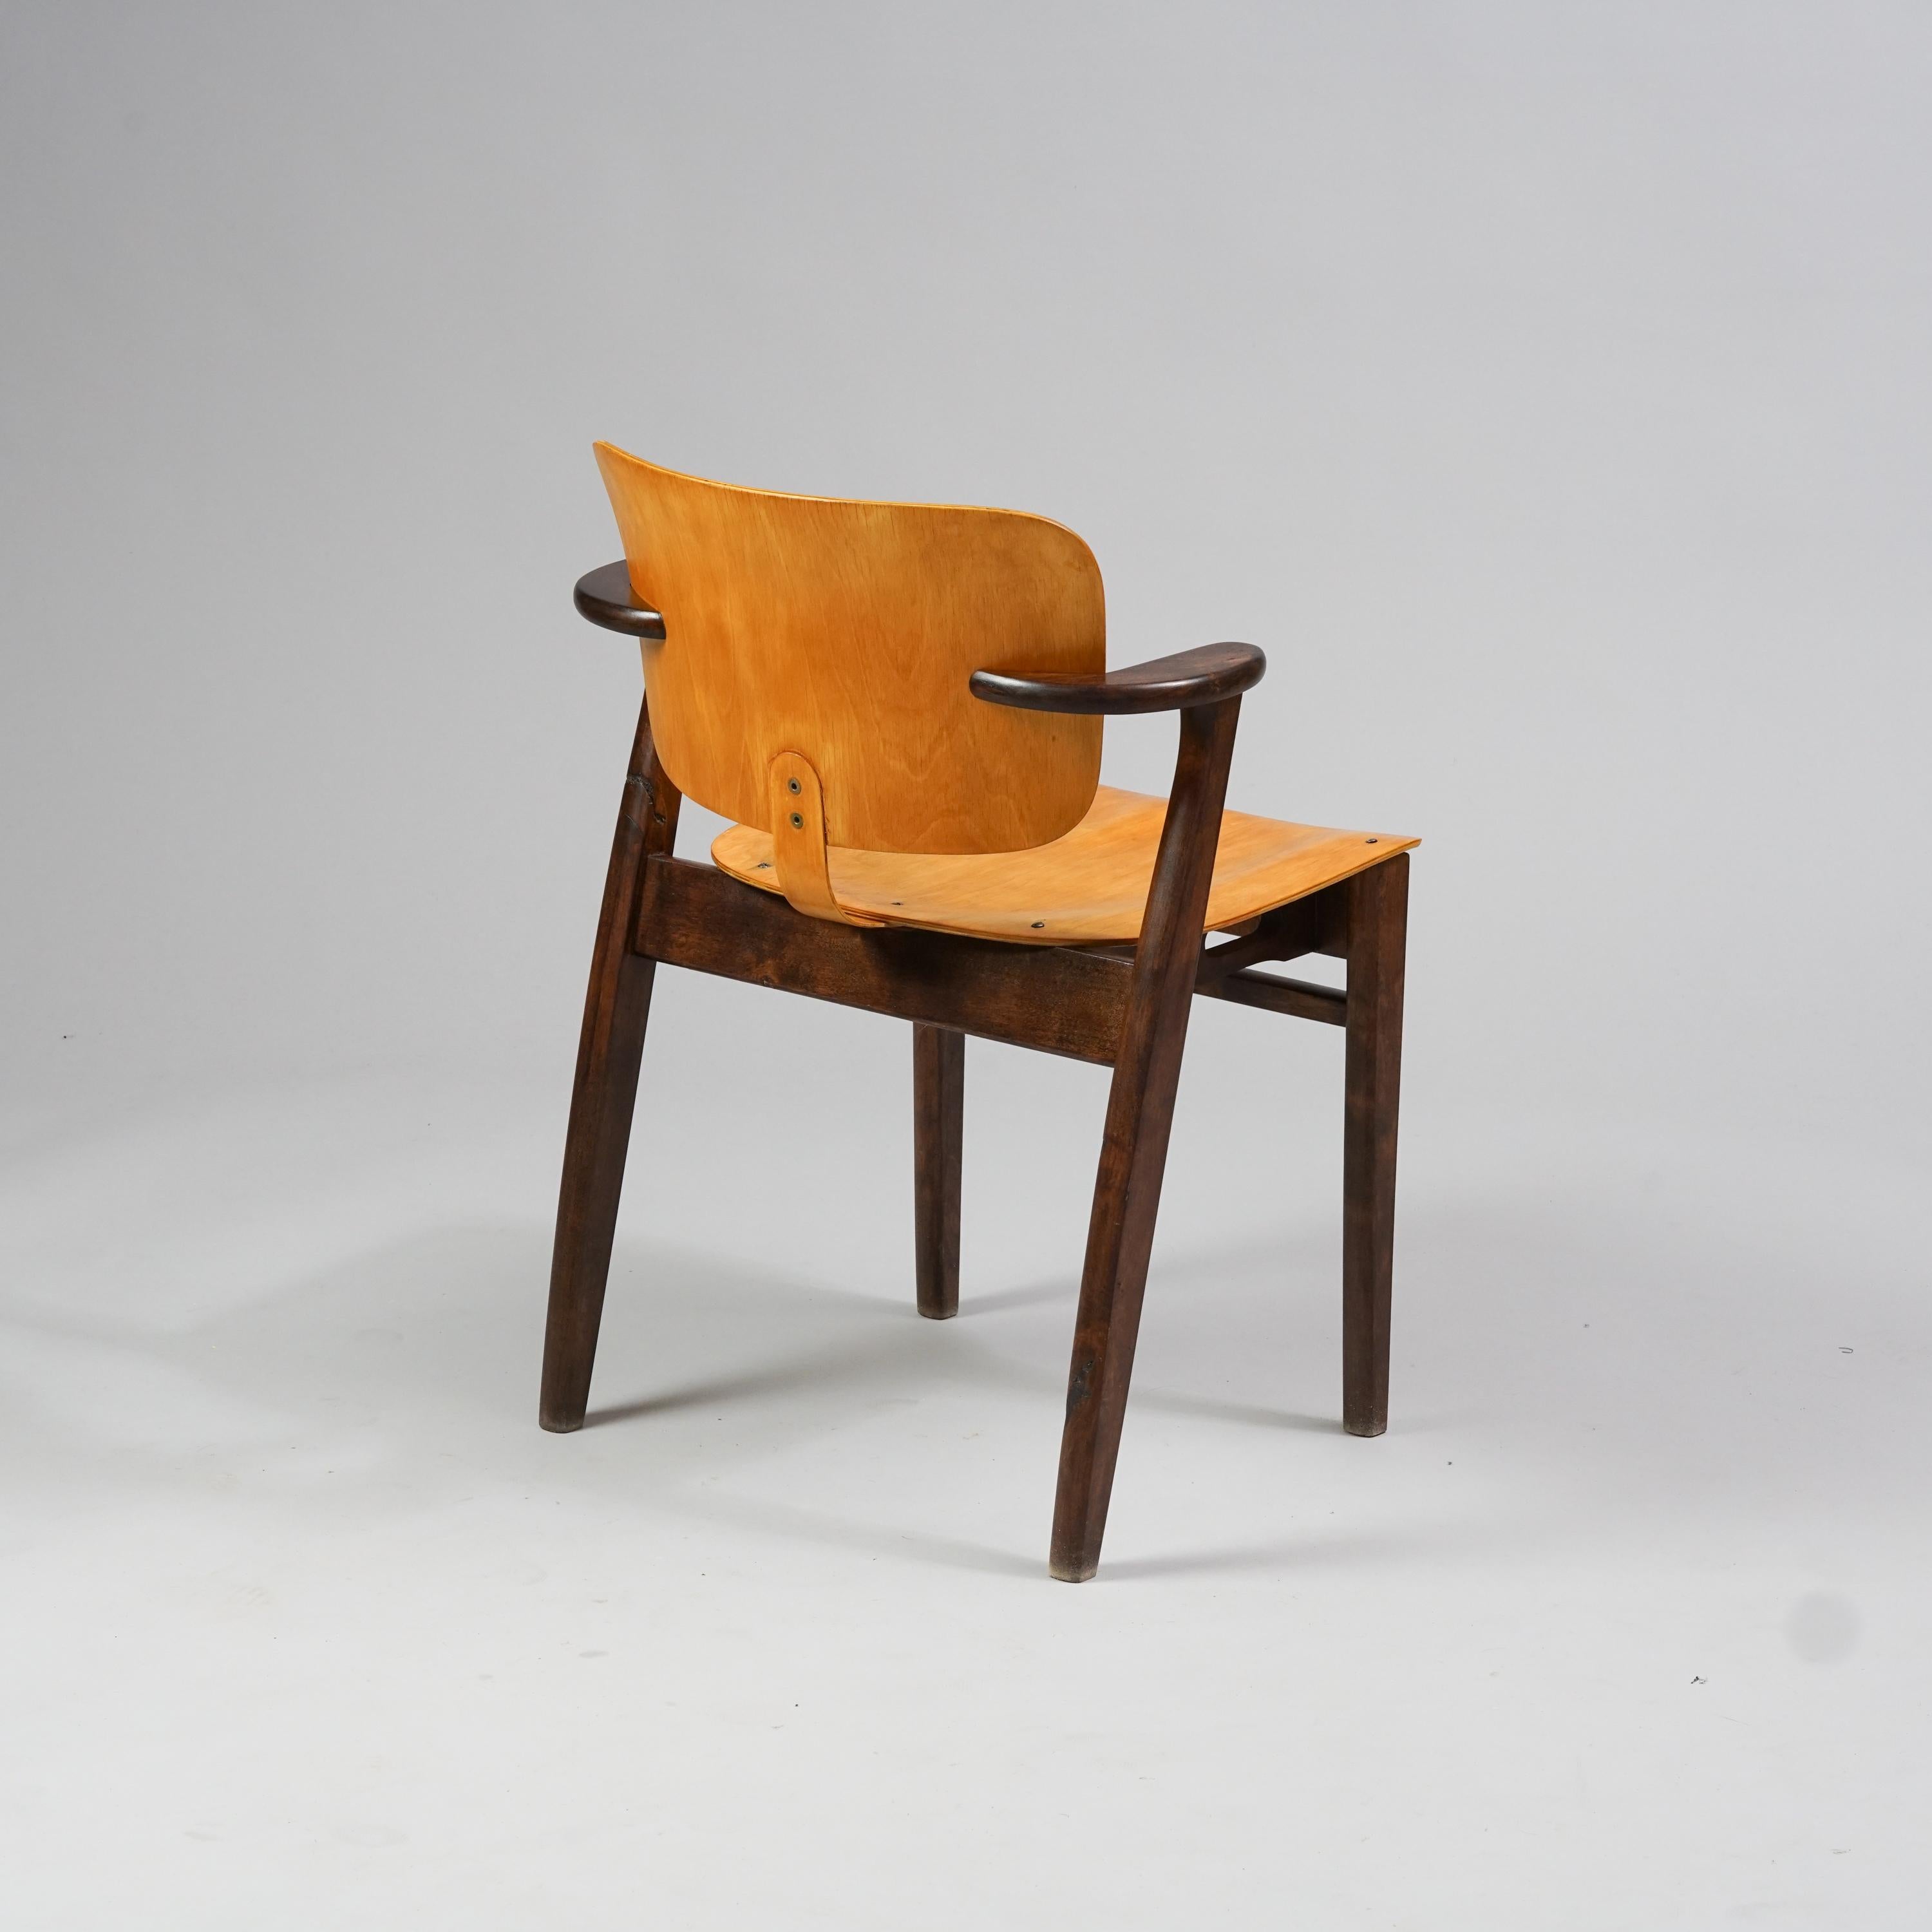 Model domus chair by Ilmari Tapiovaara from the 1950s. Birch. Completely restored. Ilmari Tapiovaara designed the domus chair originally in 1946 as a part of student residence Domus Academica's furniture.